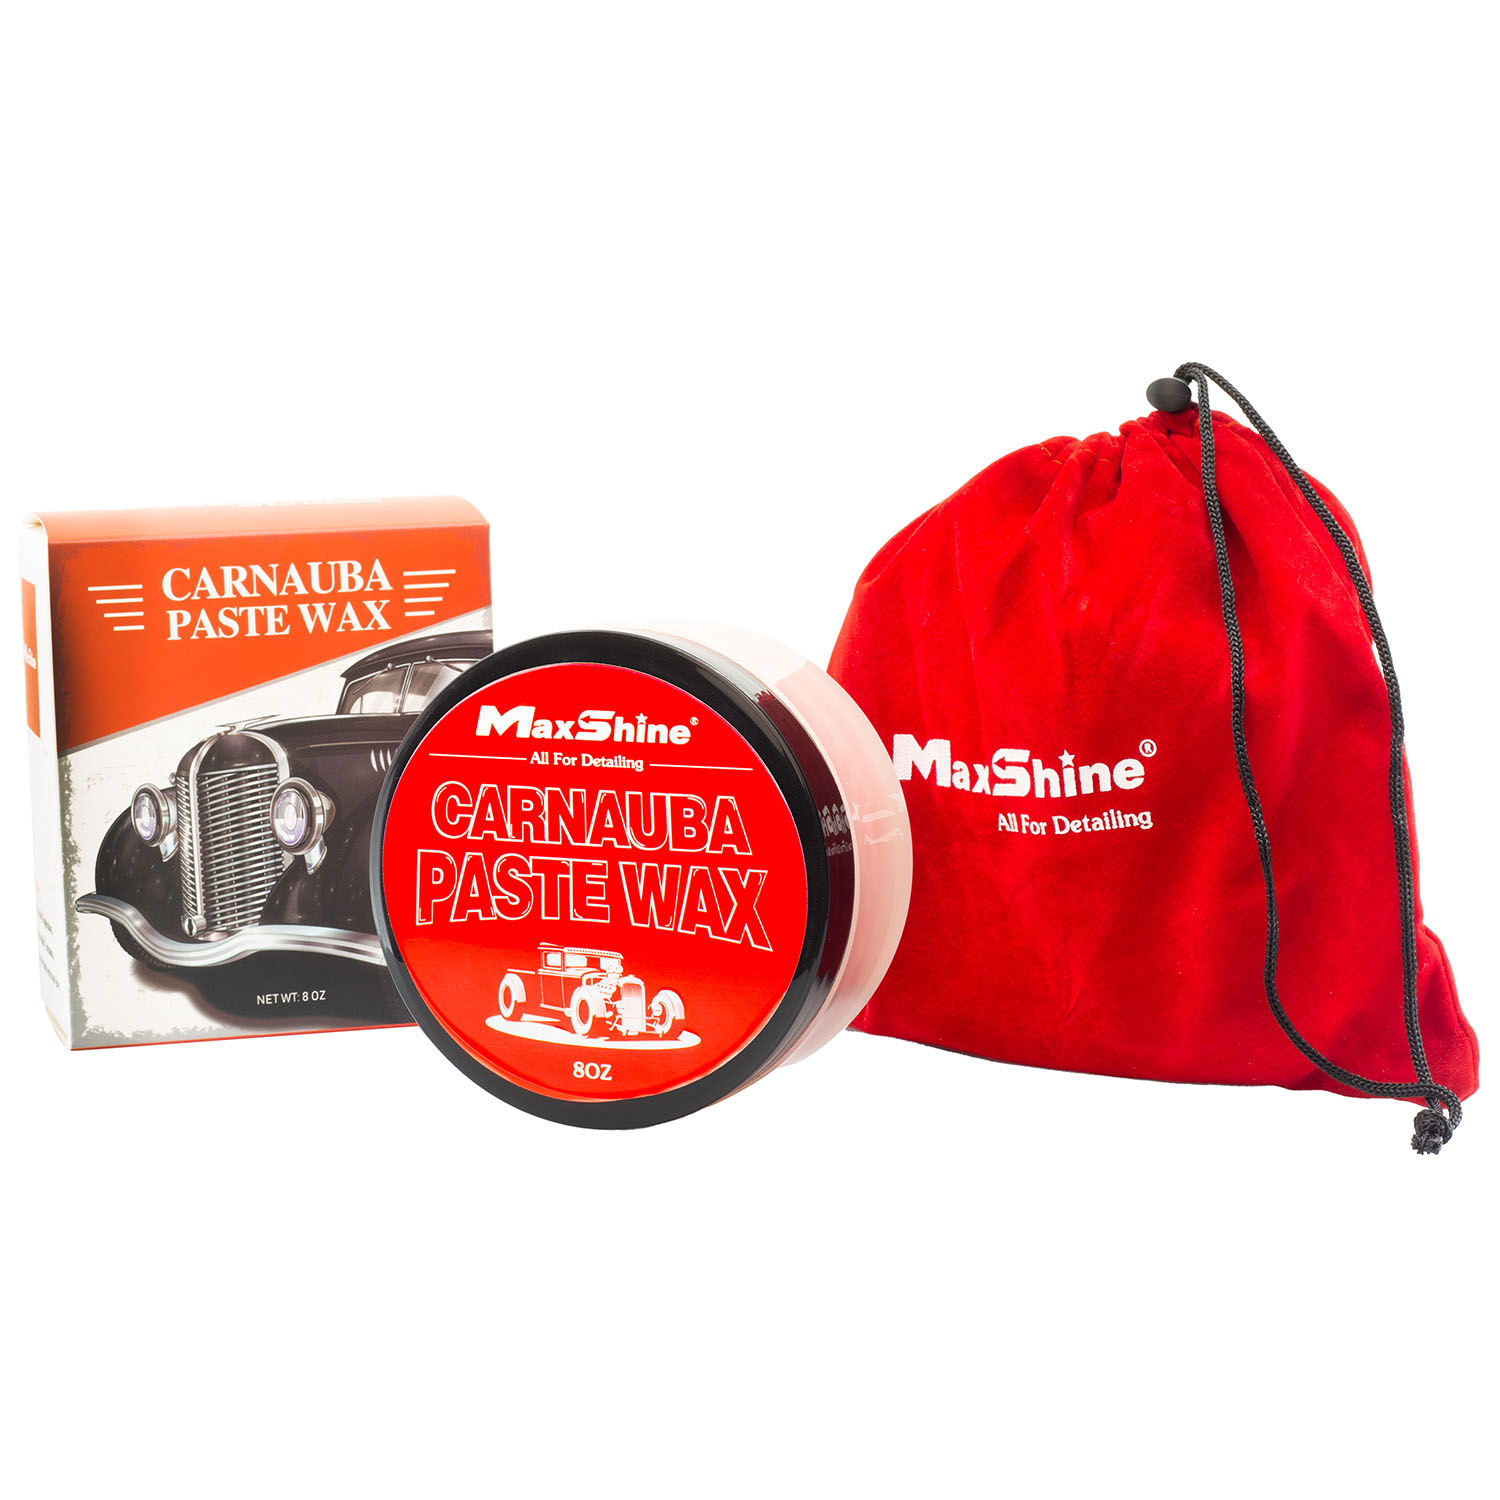 Pinnacle Signature Series II Carnauba Paste Wax will give you a deep, wet  finish will exceed your expectations. car wax, carnauba paste wax, pinnacle